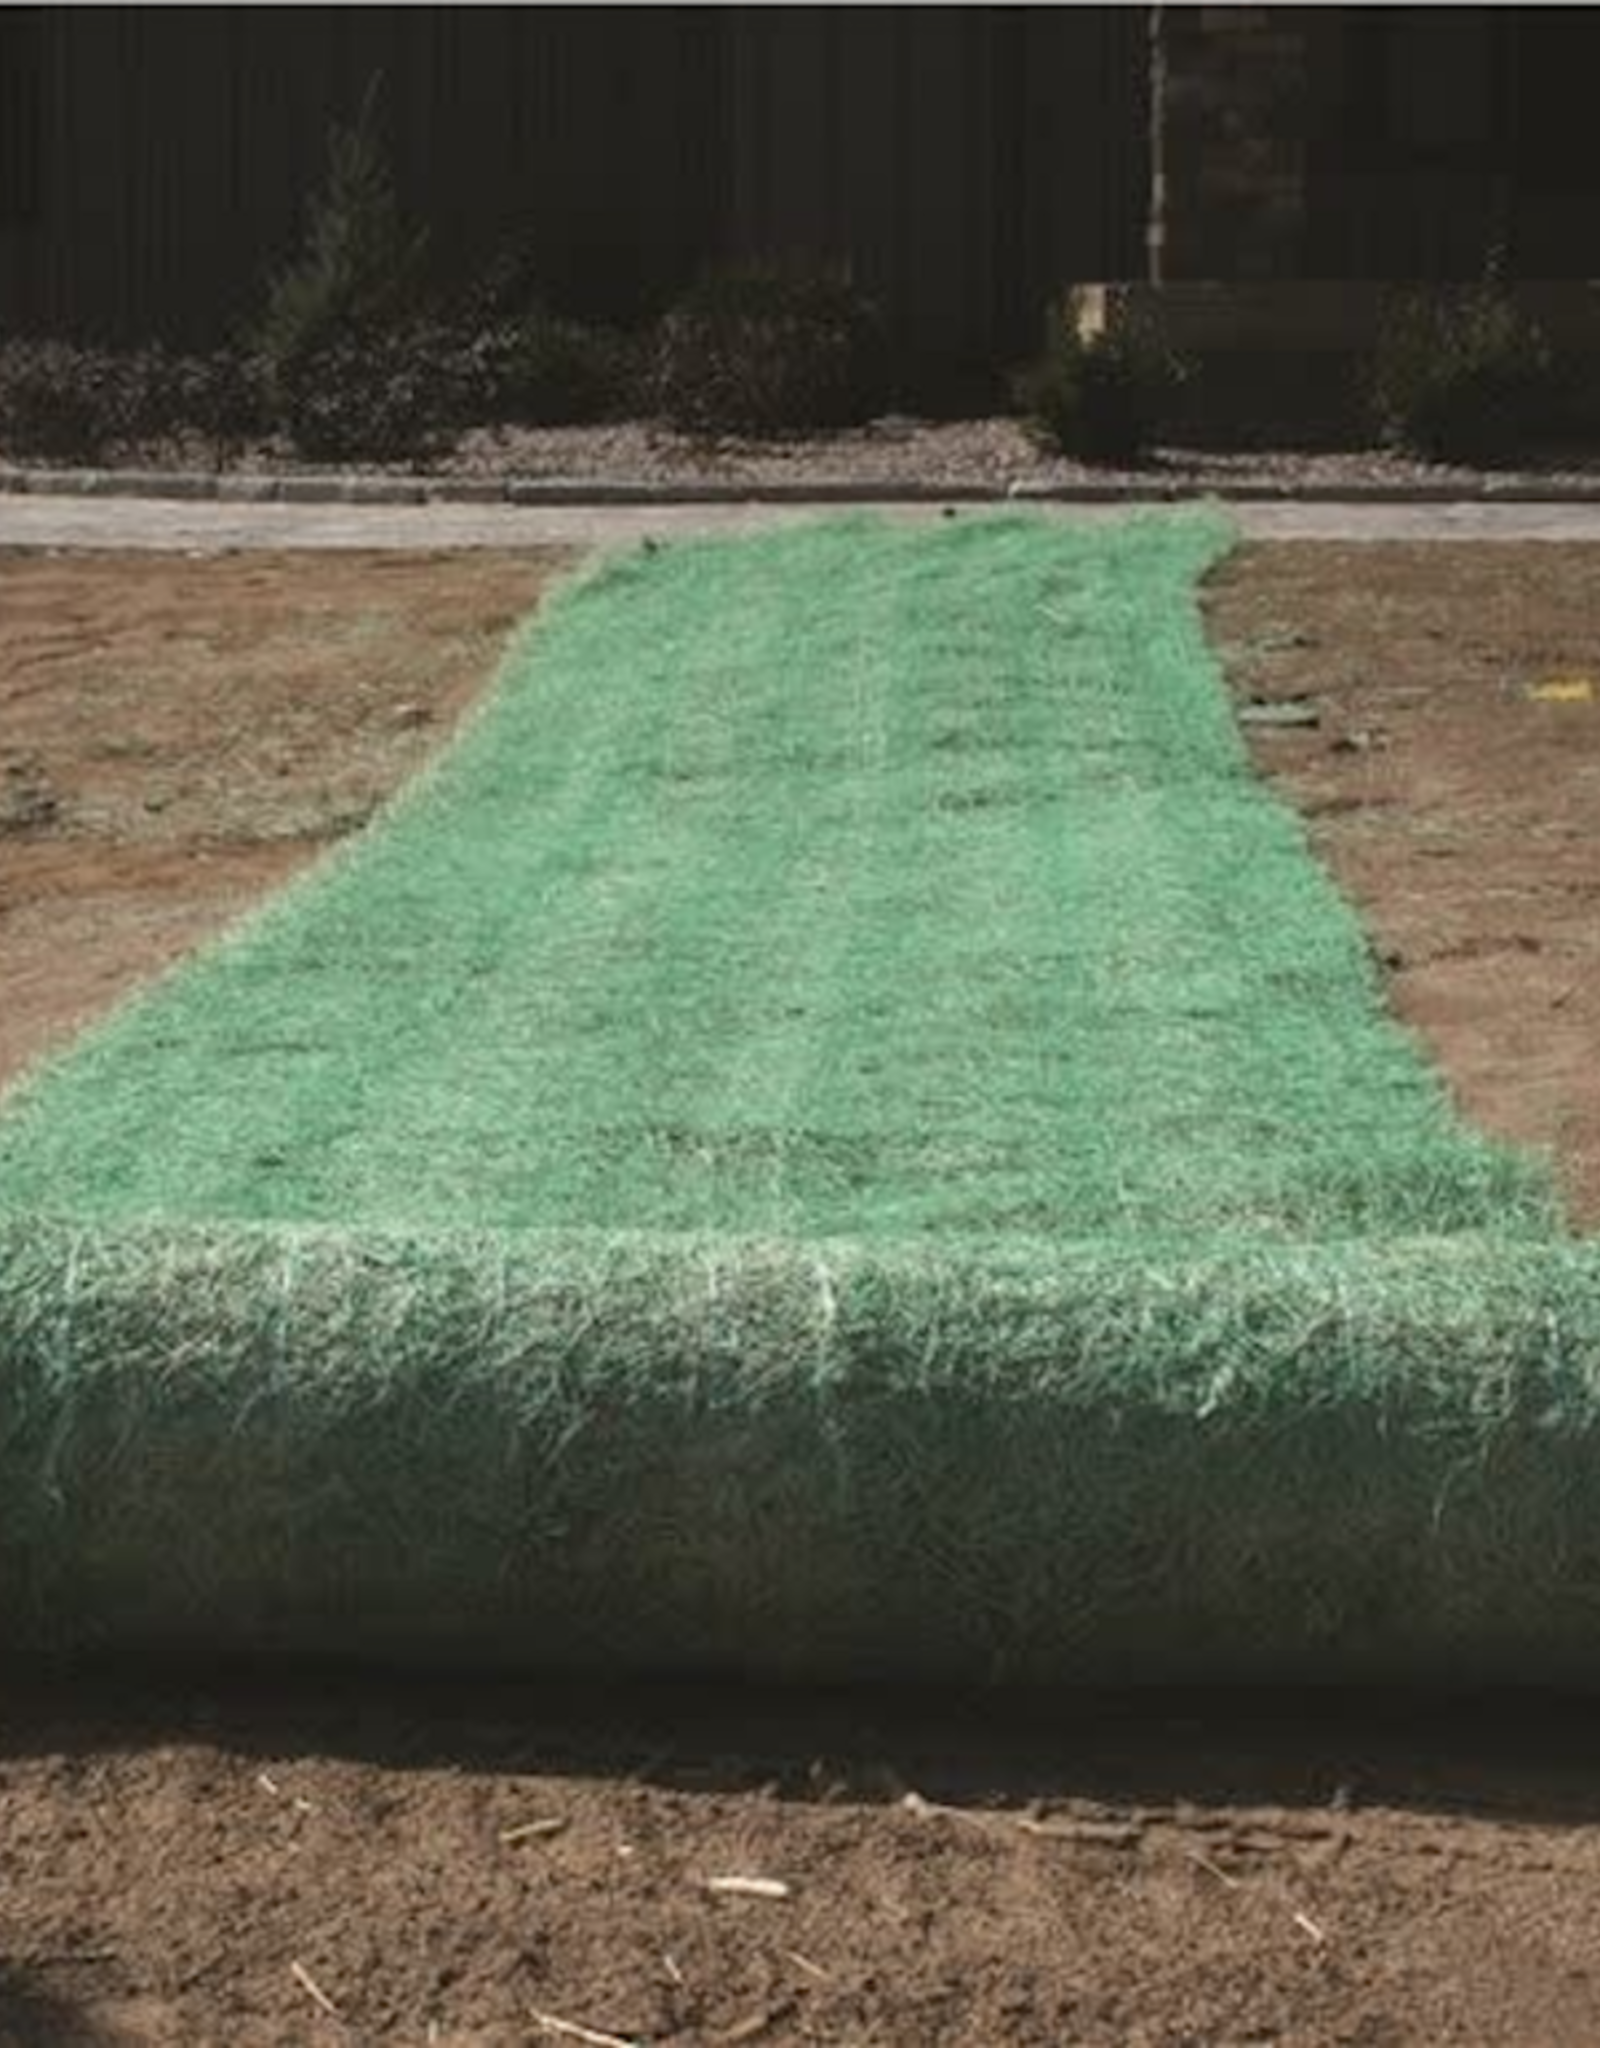 Curlex Curlex Erosion Control Blanket (Natural) - American Excelsior Type 2, Double Net 8' x 150'